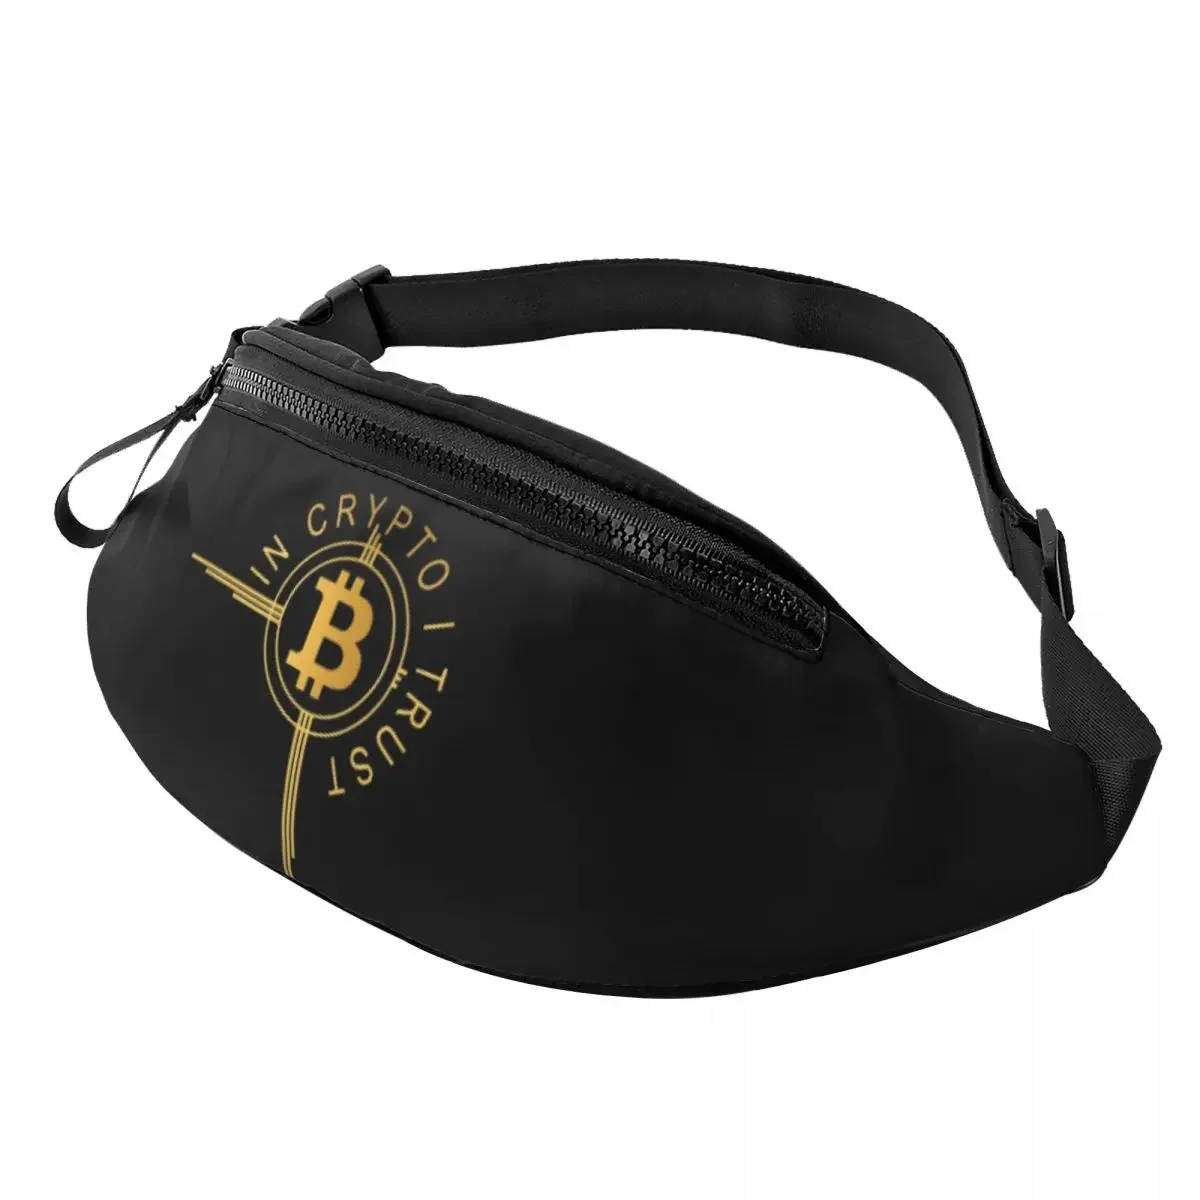 

Cool In Crypto I Trust Bitcoin Fanny Pack for Cycling Camping Men Women Blockchain Miner Crossbody Waist Bag Phone Money Pouch